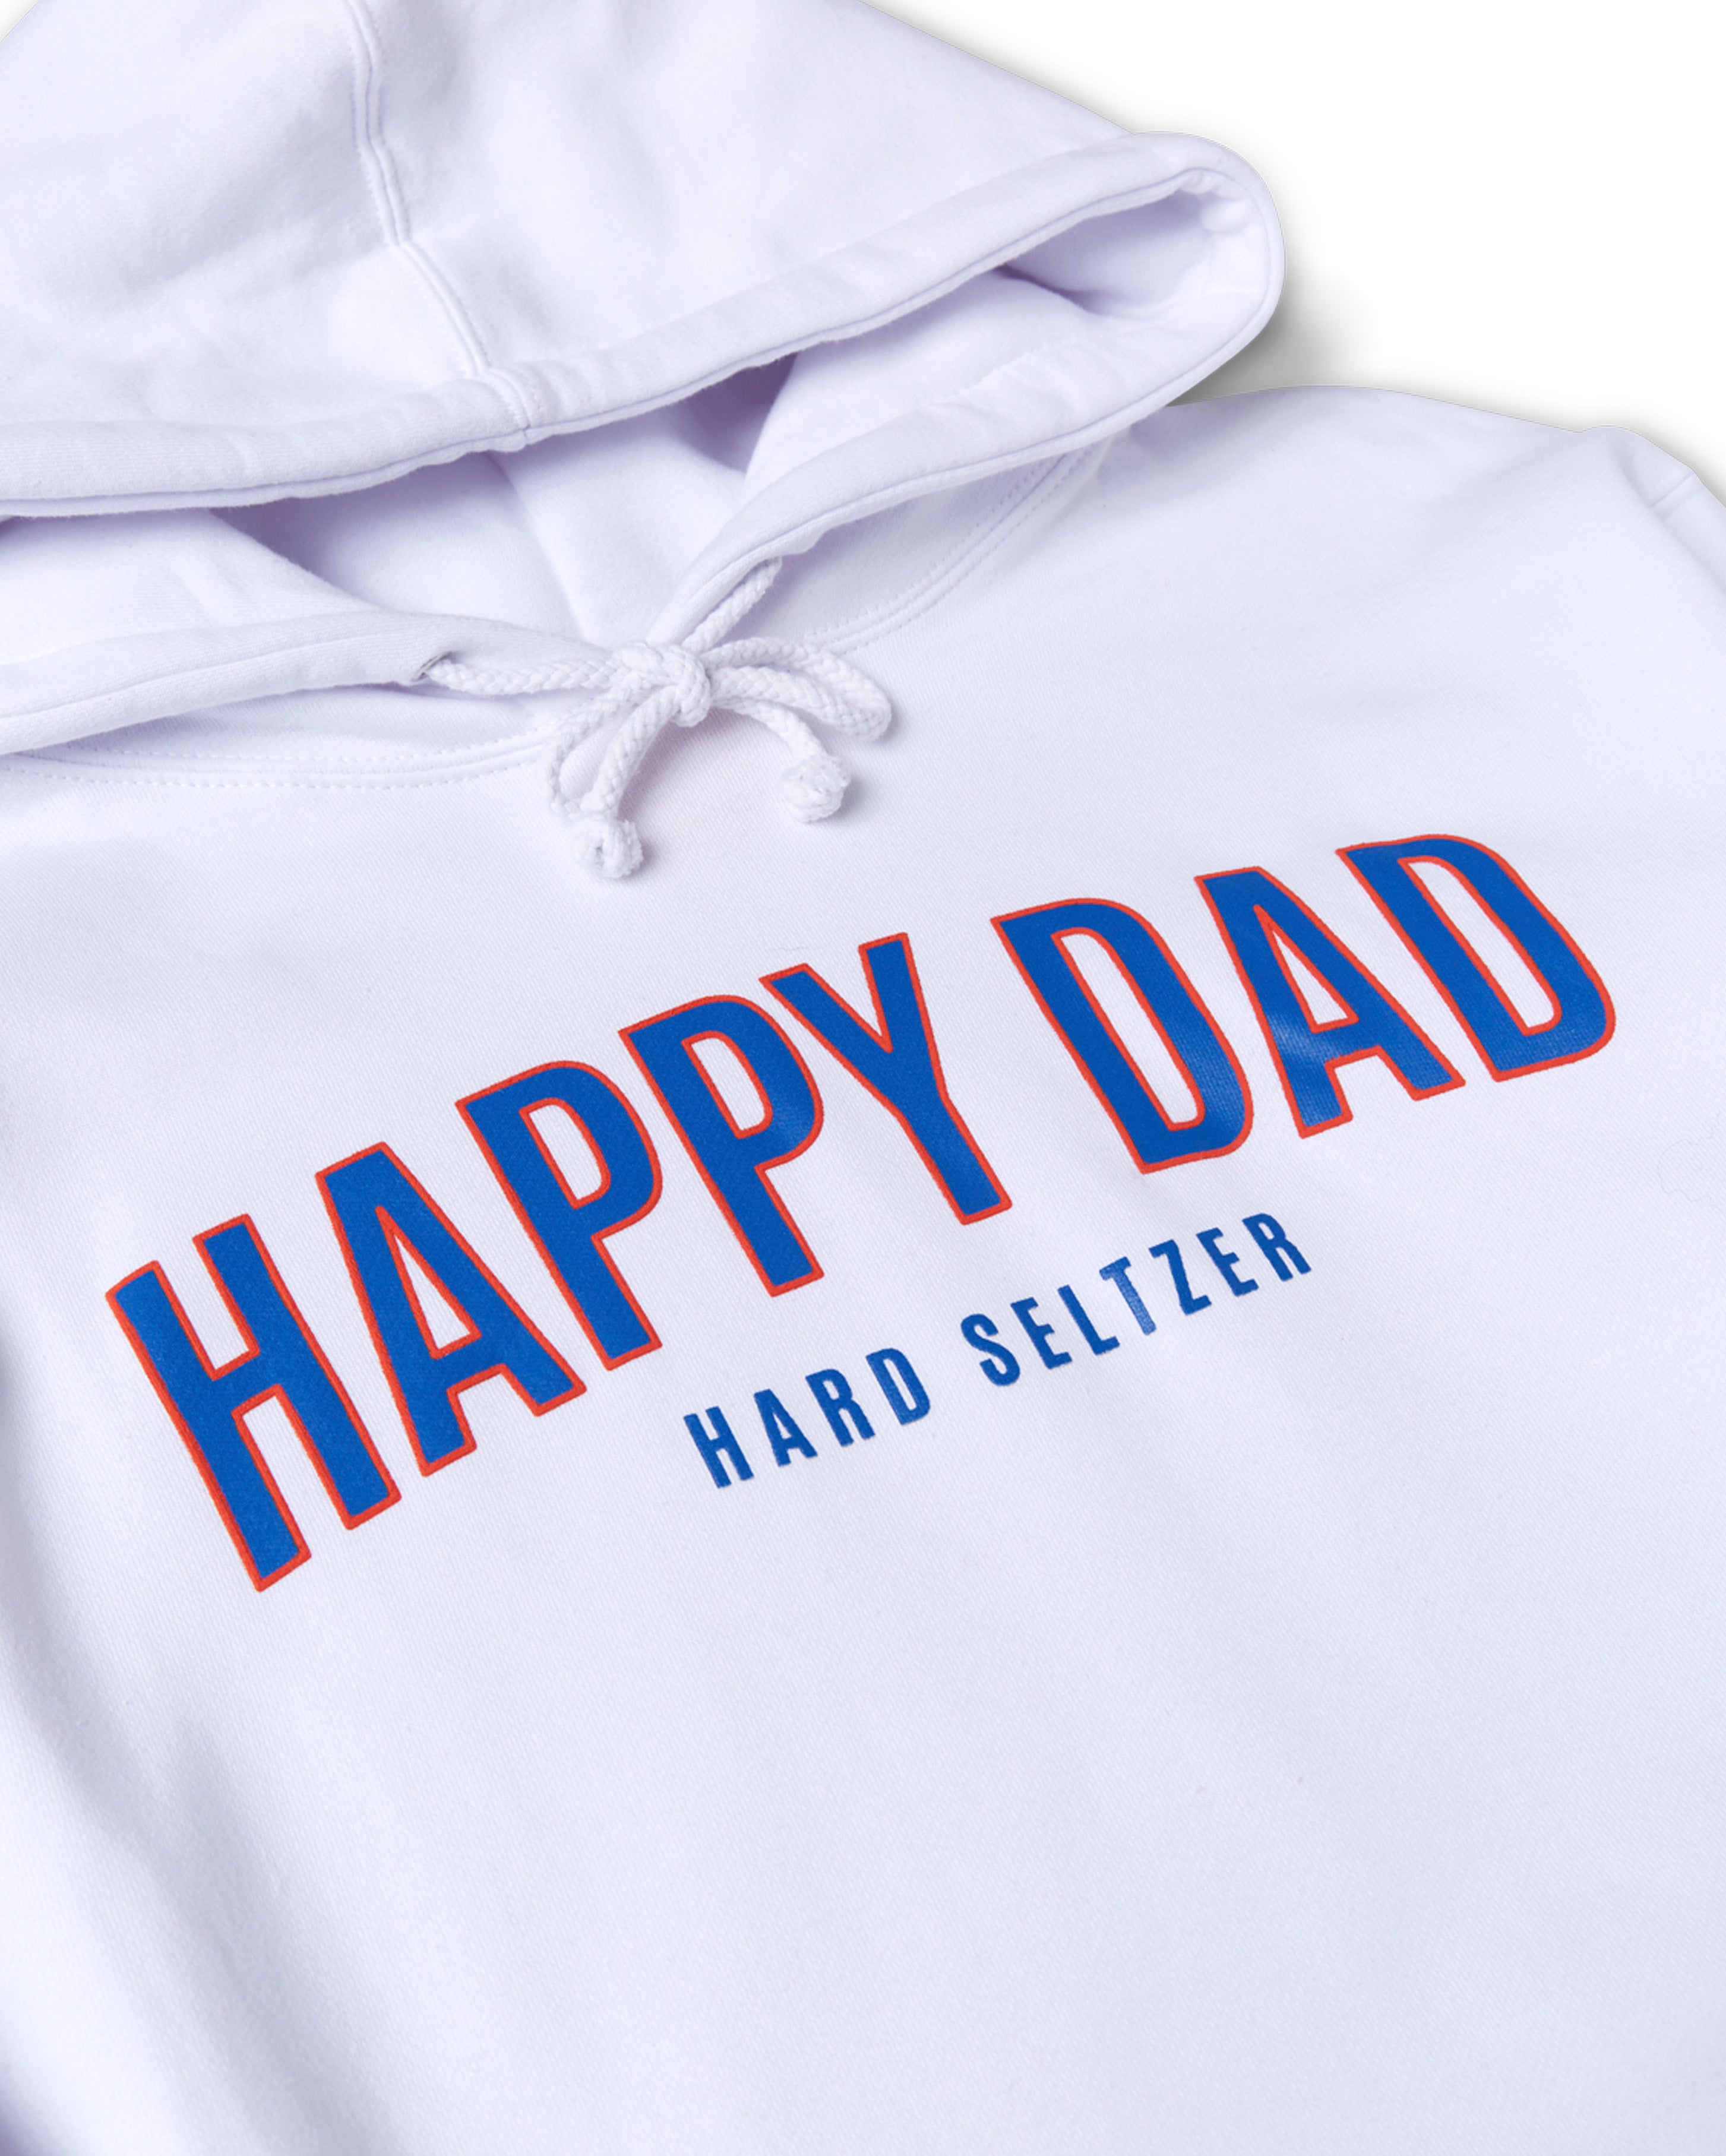 Happy Dad Arch Hoodie (White)